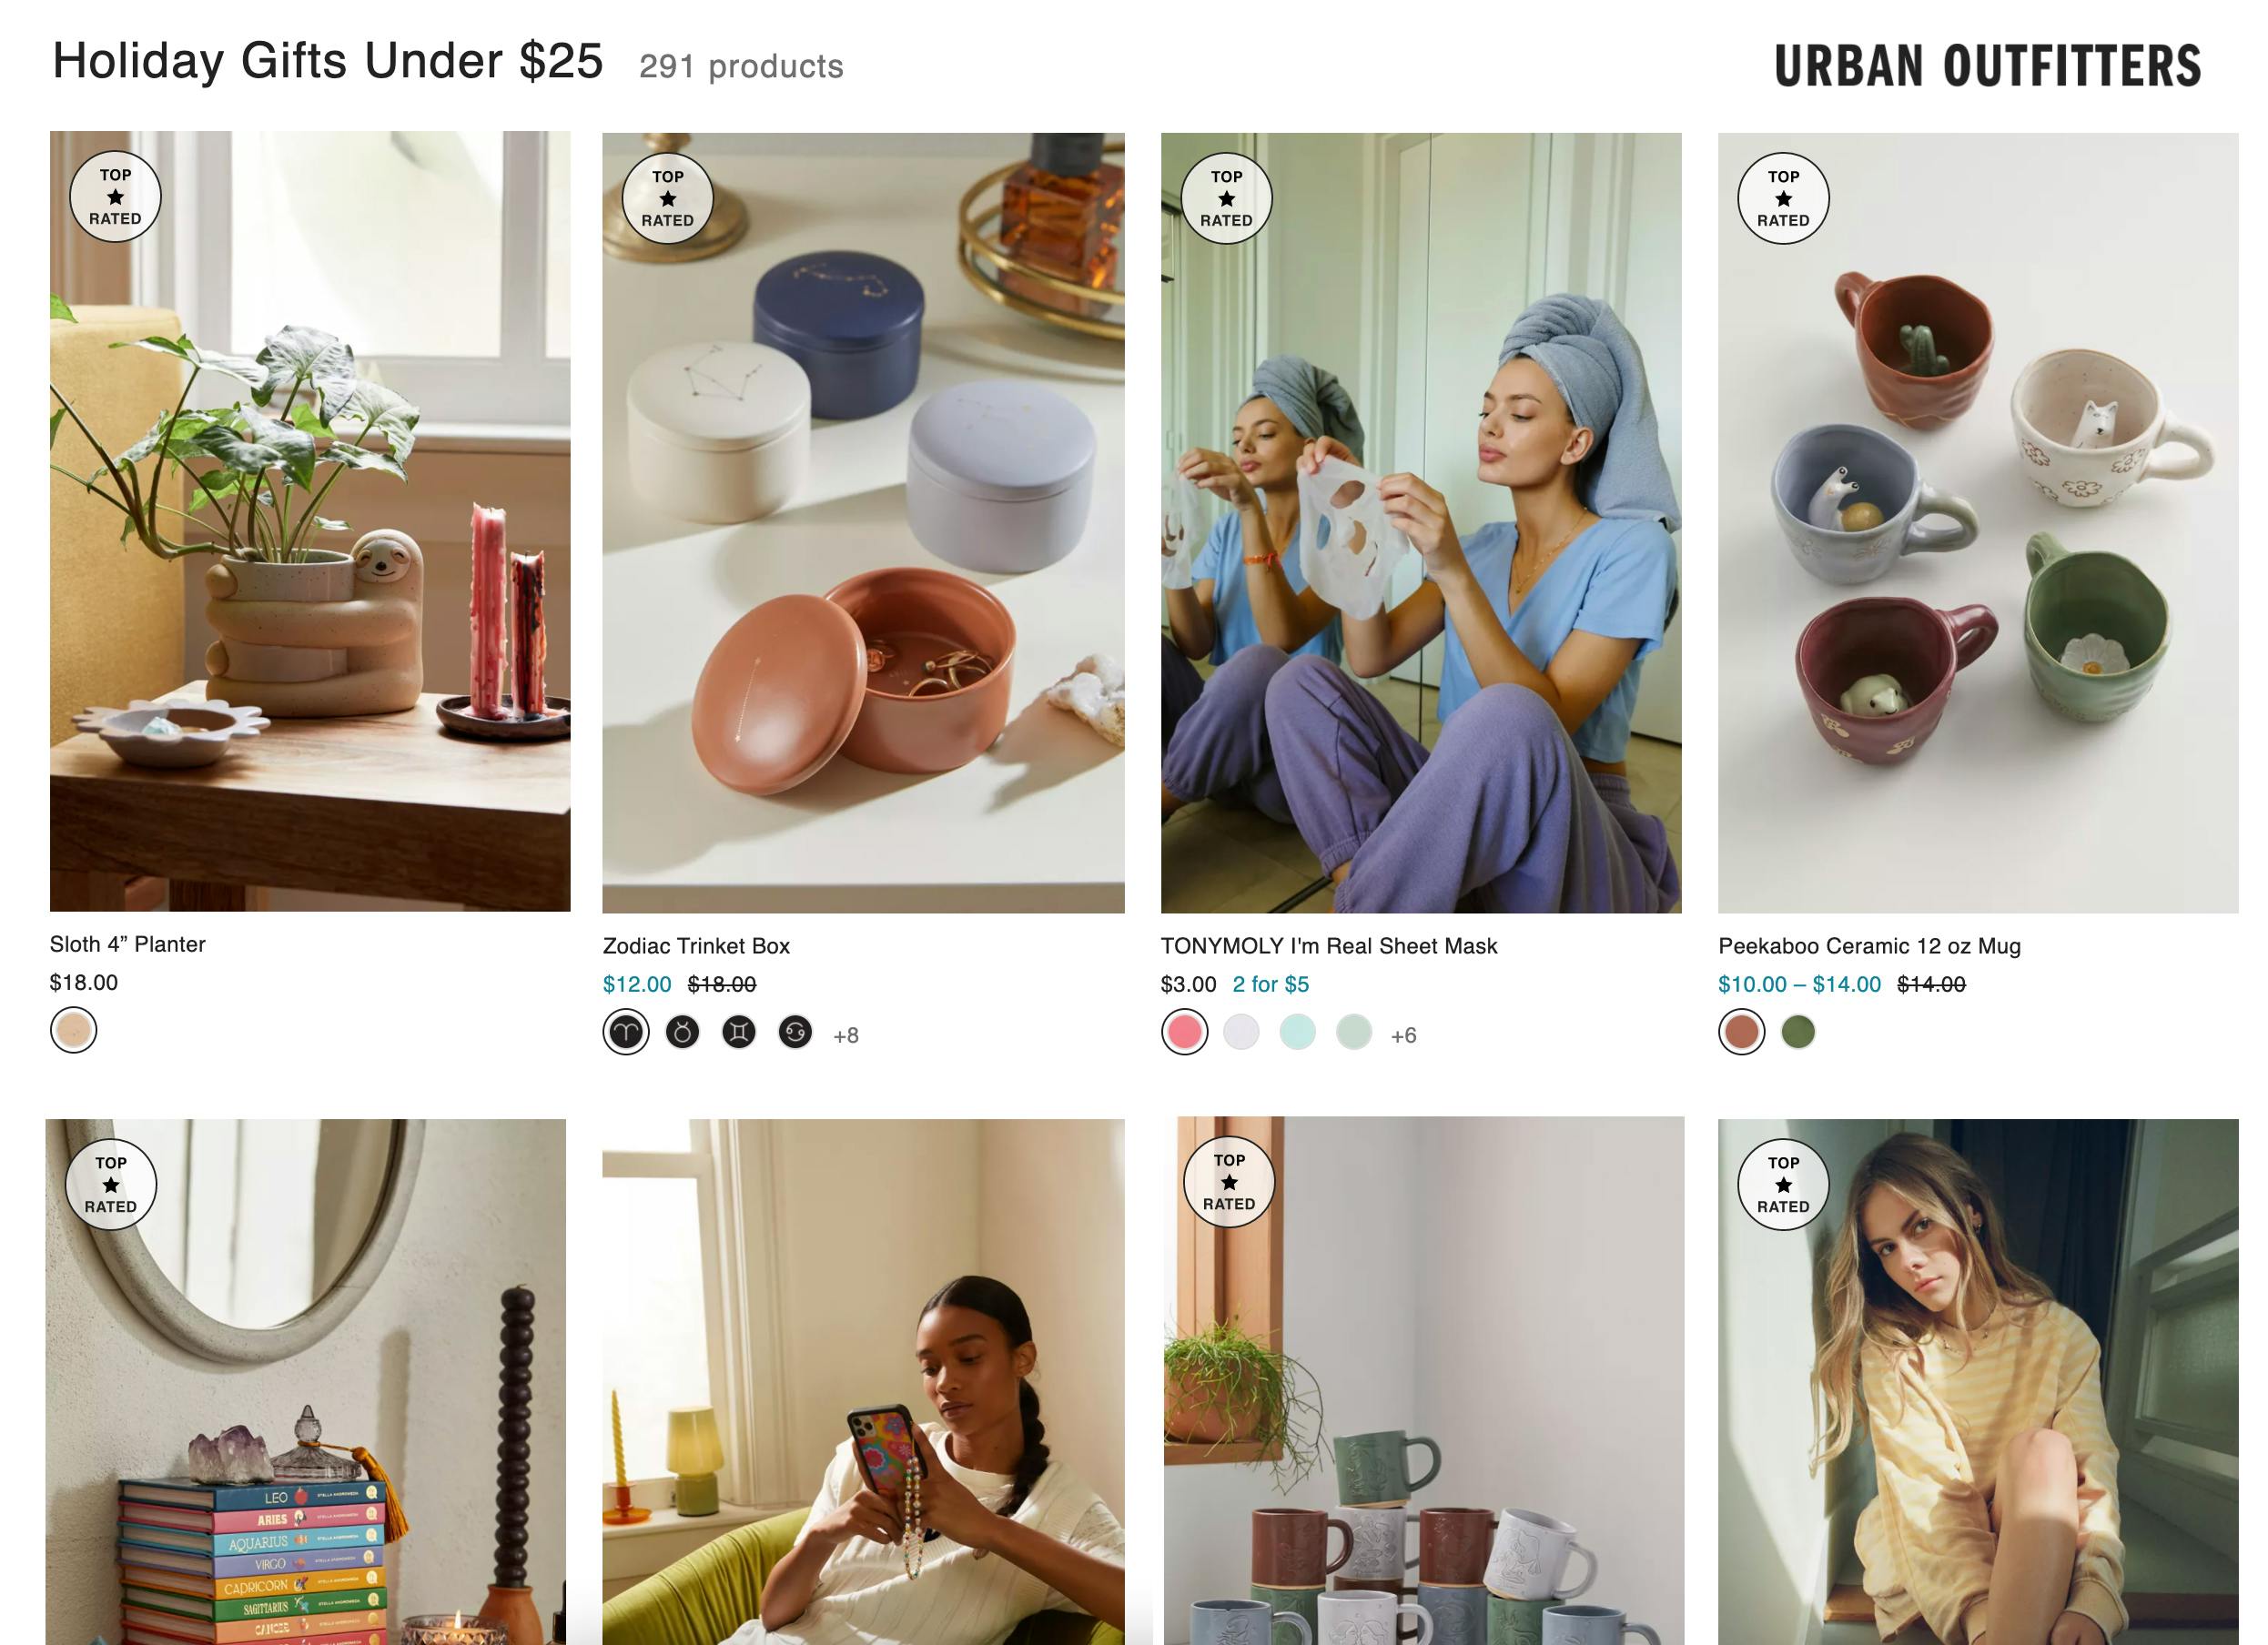 Urban Outfitters holiday gift guide webpage screenshot